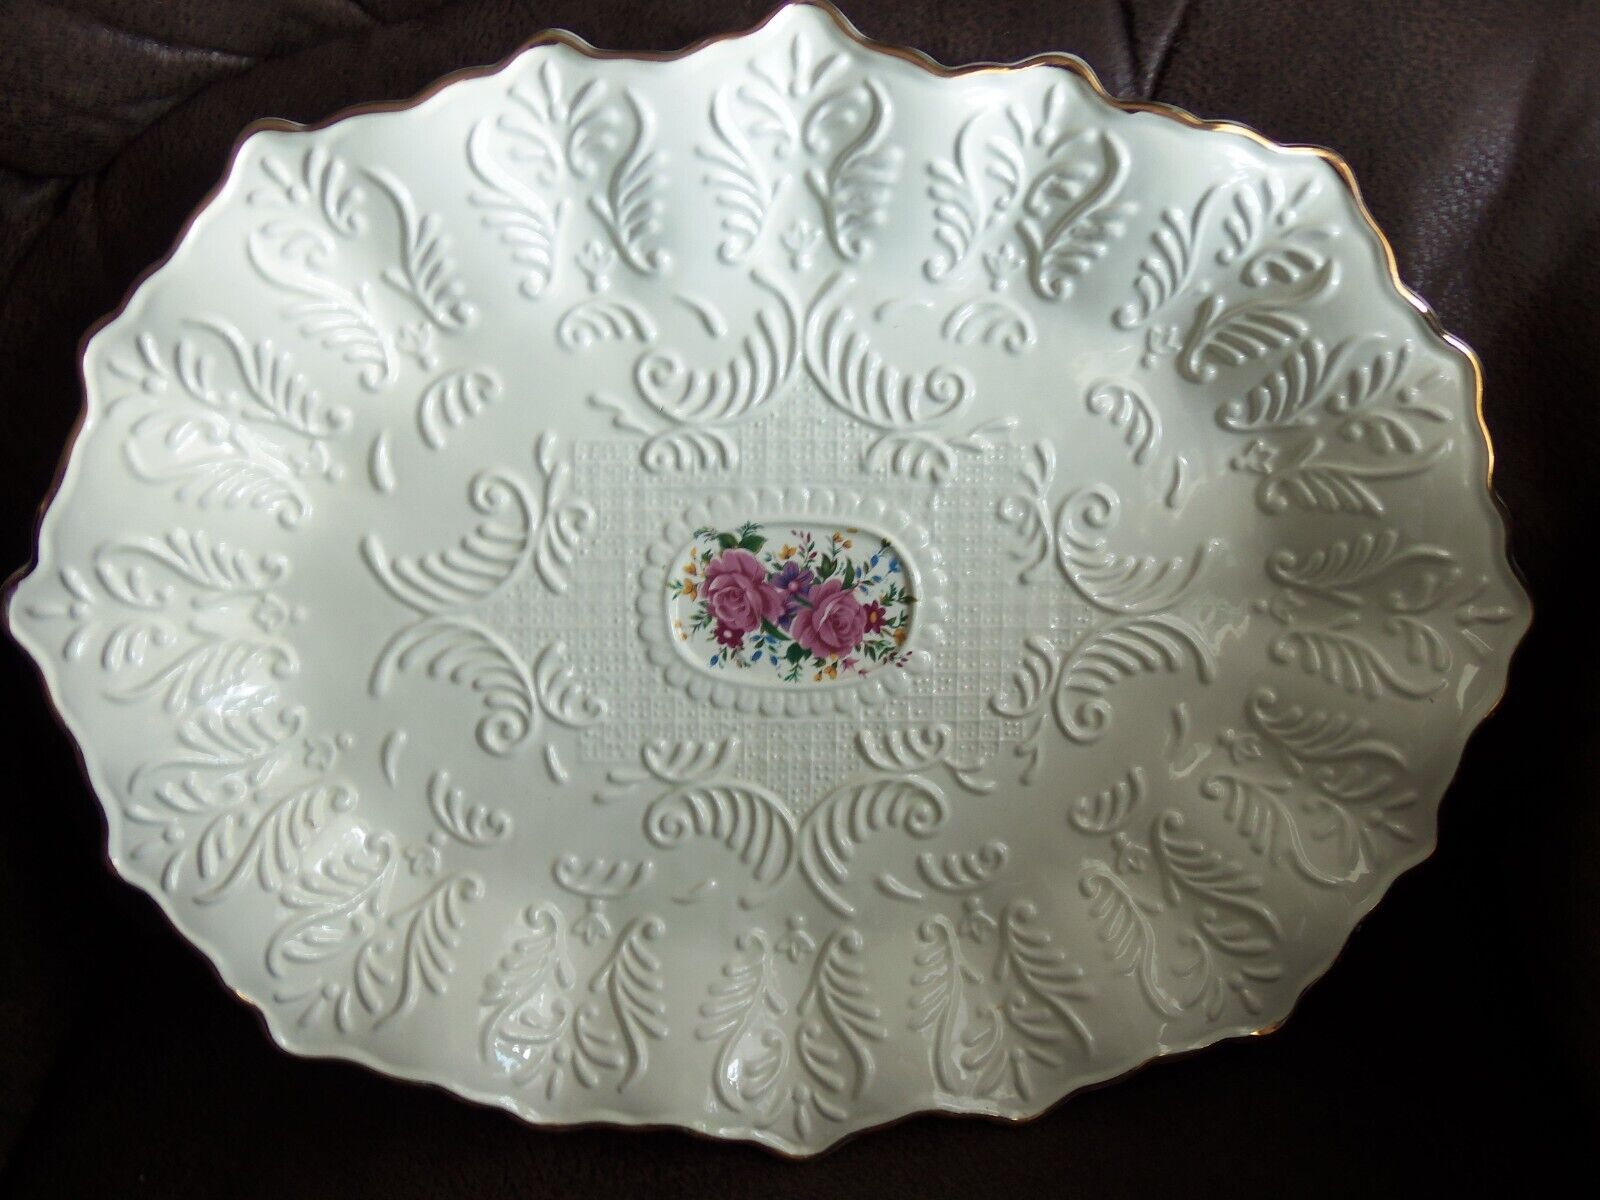 Beautiful Formalities by Baum Brothers Victorian Rose Serving Tray Platter